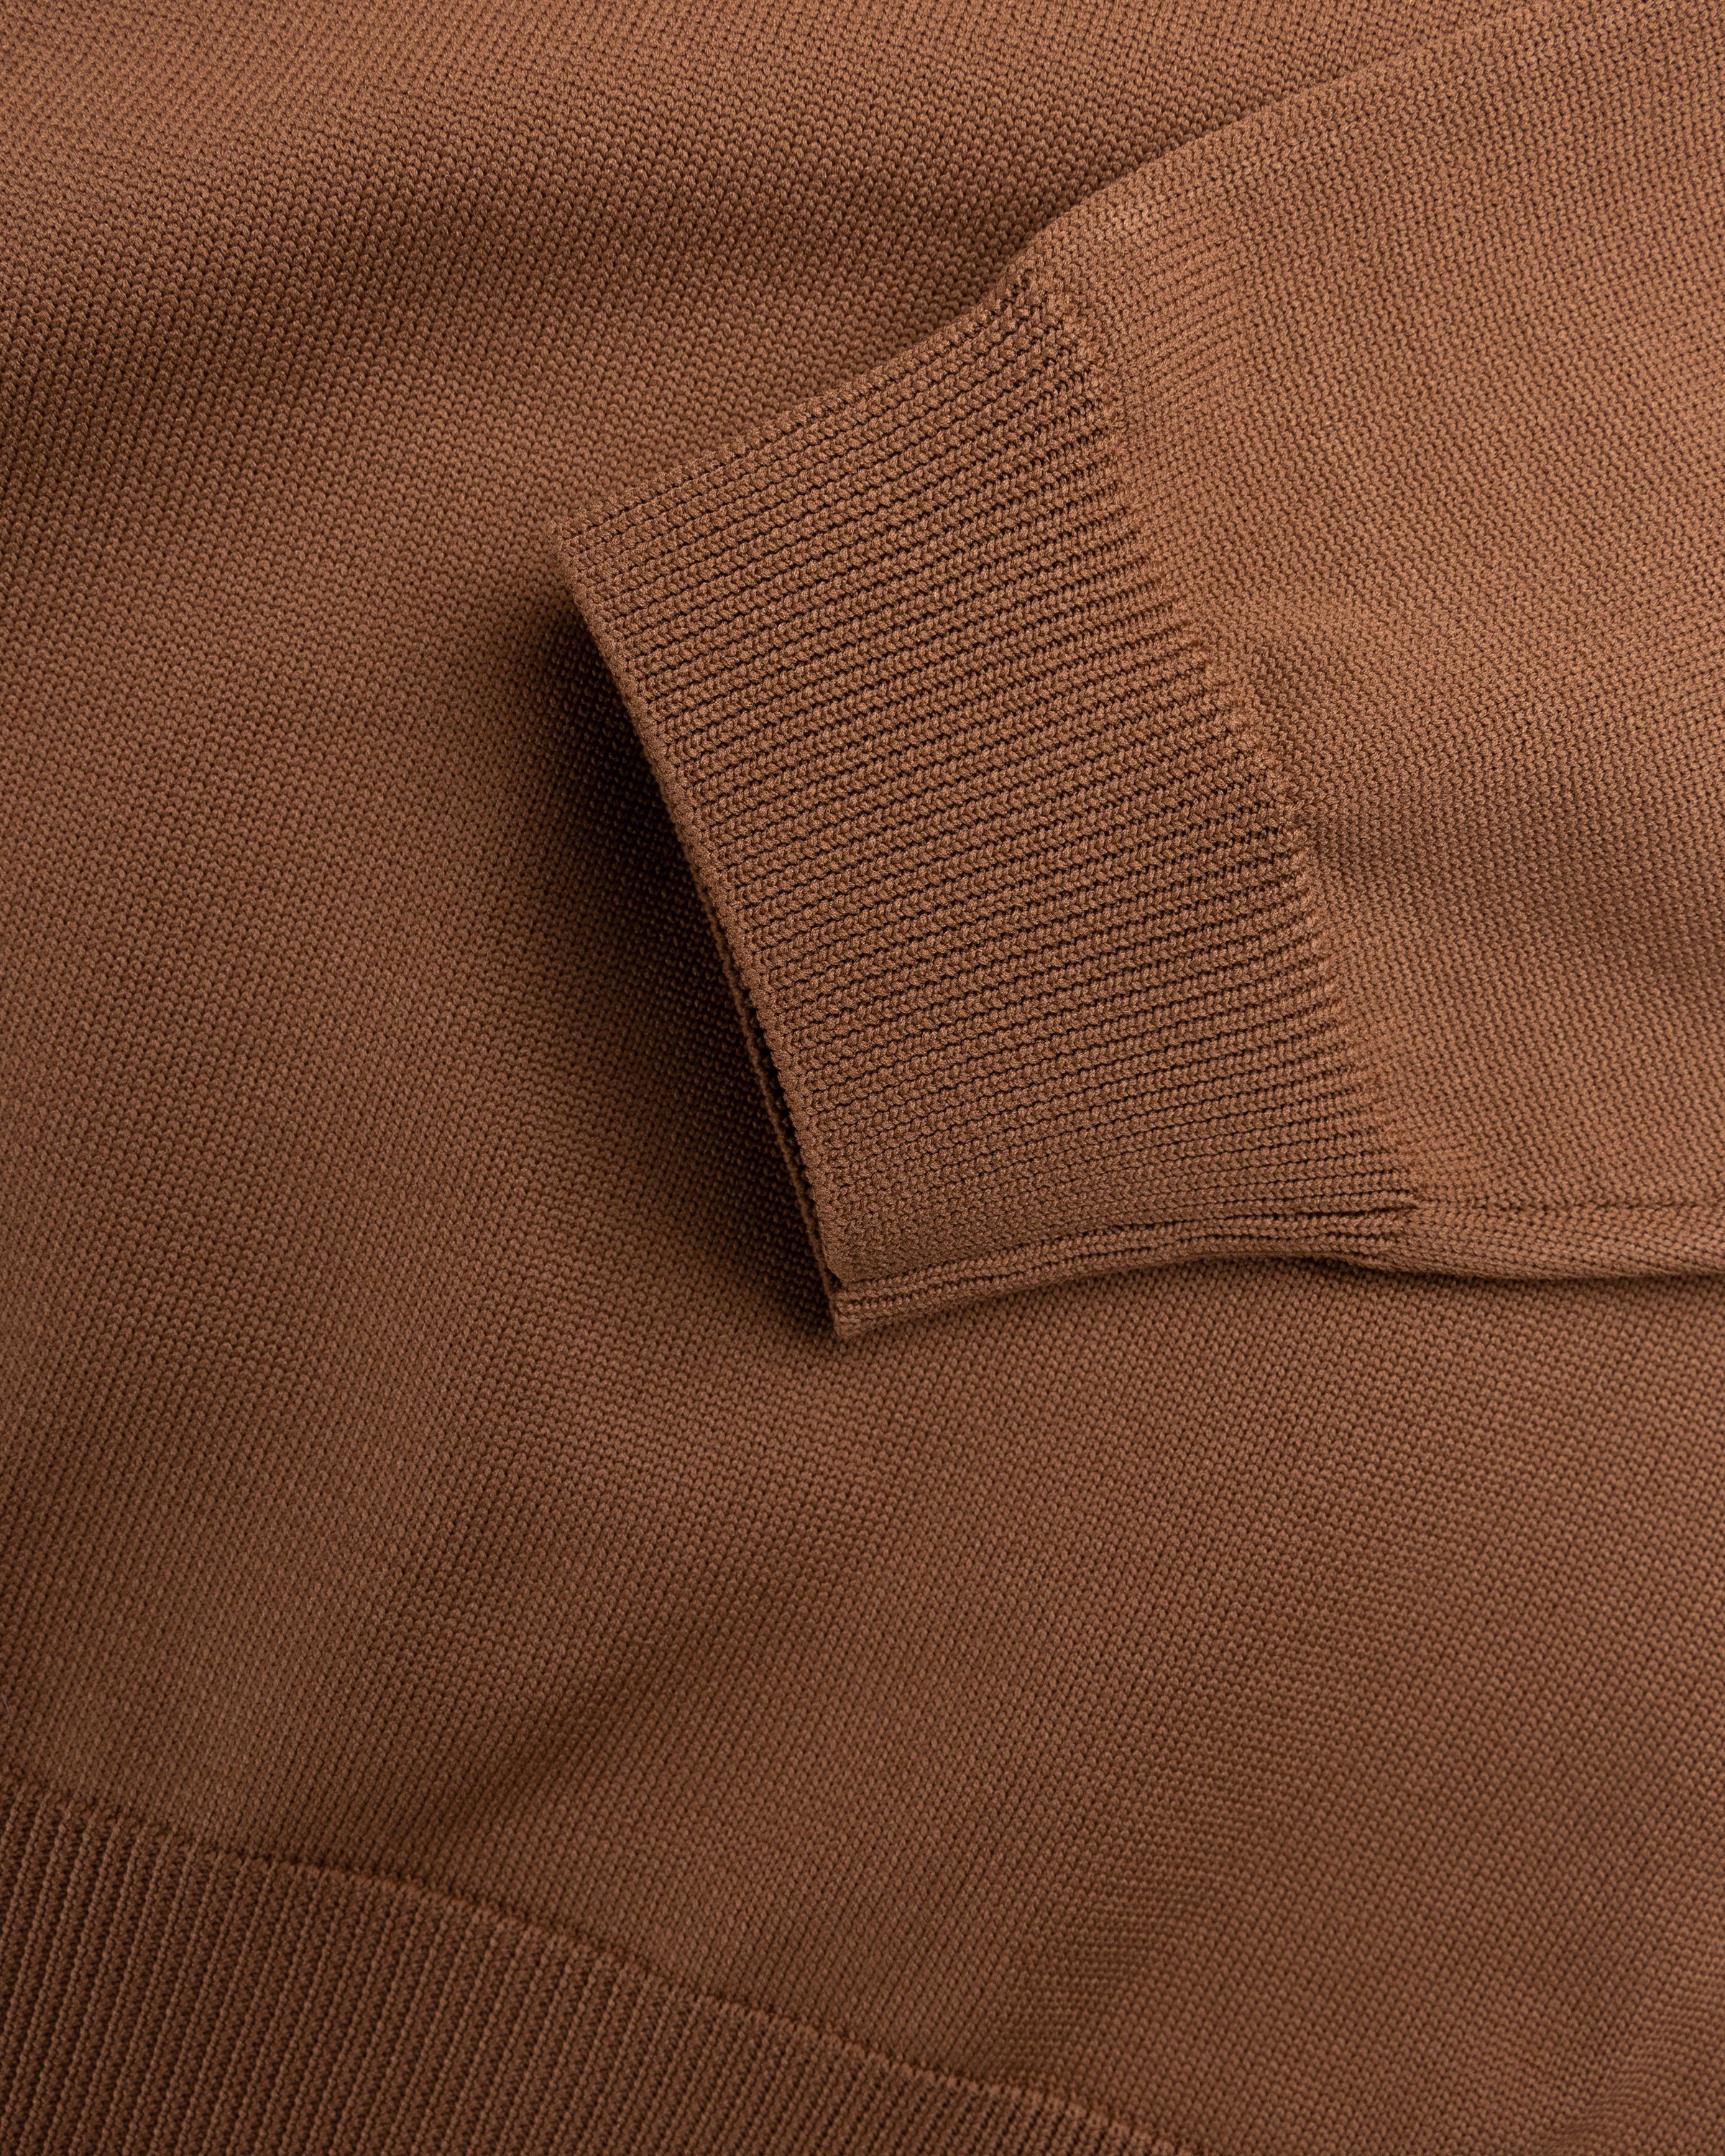 Highsnobiety HS05 - Long Sleeves Knit Polo Brown - Clothing - Brown - Image 7